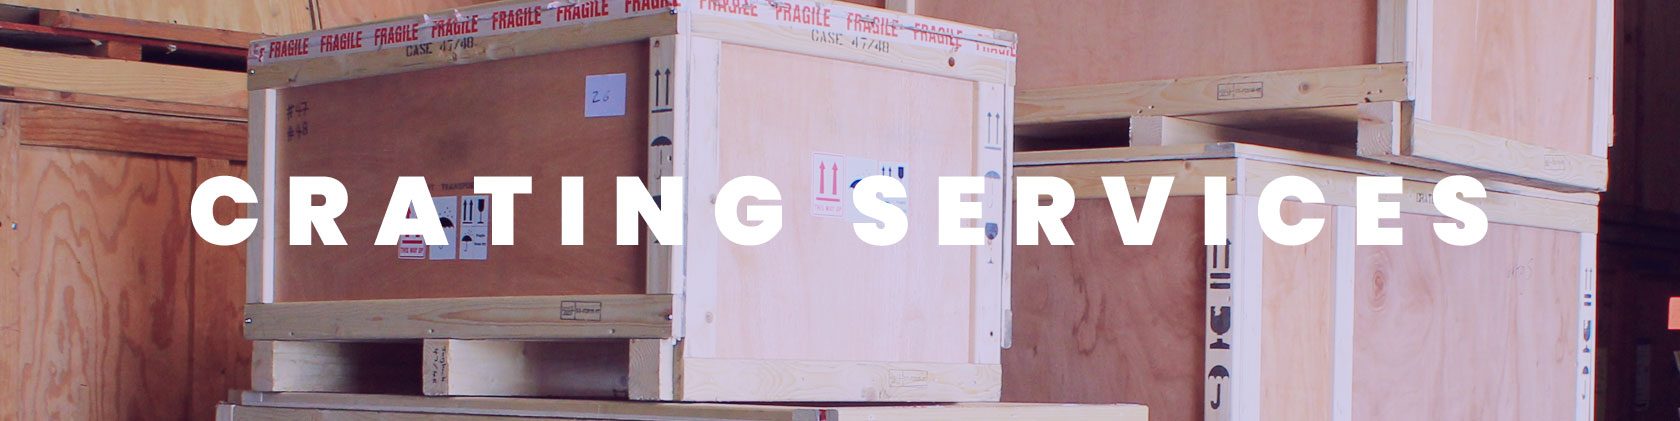 crating services for moving in la